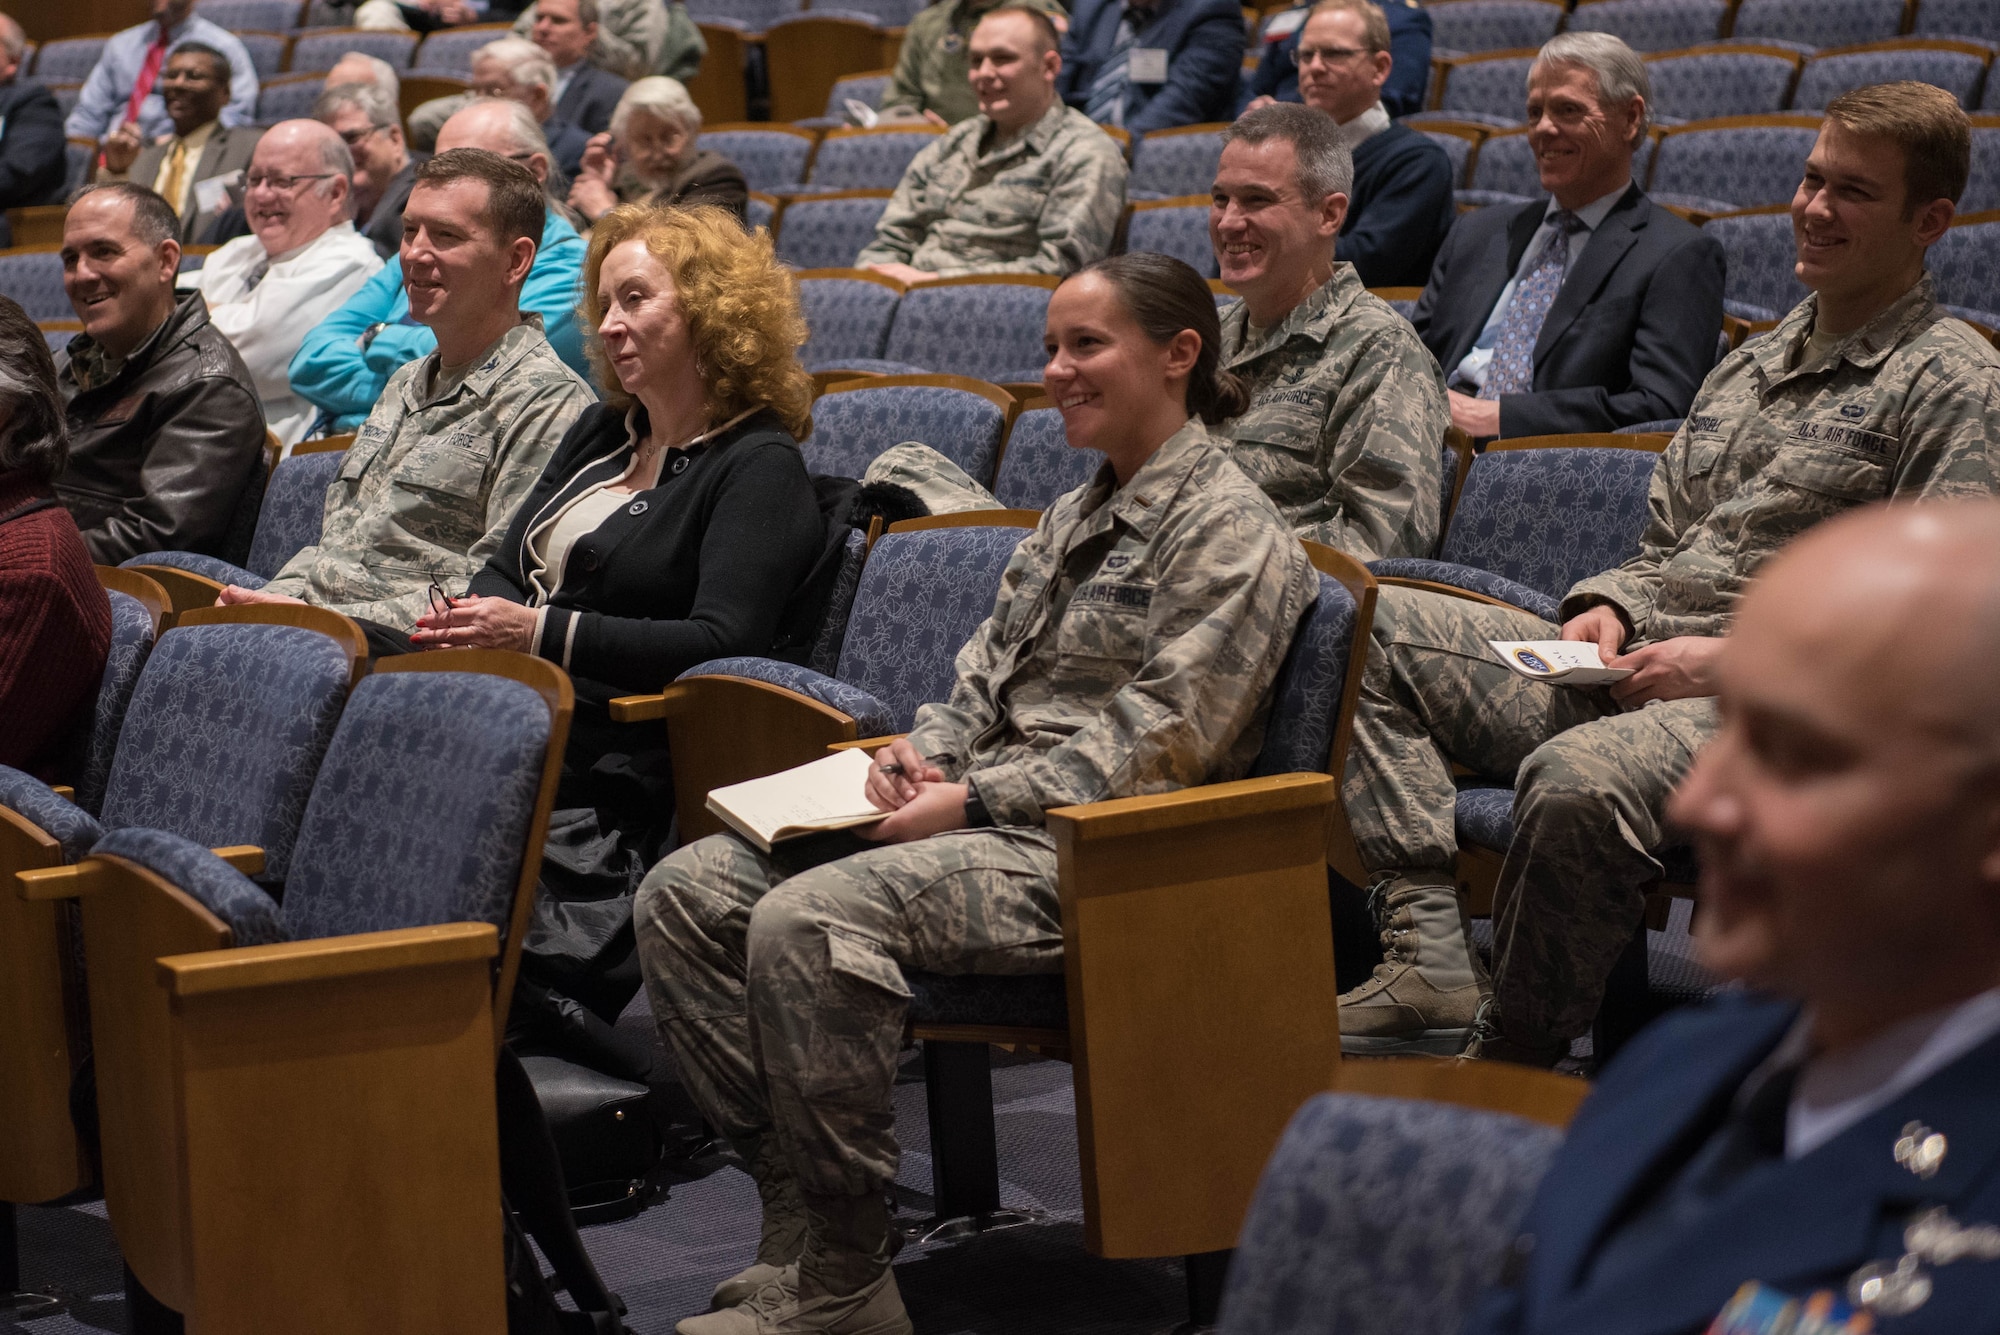 Scientists, researchers and other various guests listen to Air Force Institute of Technology alumni and heads of fields of science during the AFIT Centennial Symposium about the future of the Air Force at the Sinclair Ponitz Conference Center in Dayton, Ohio, Mar. 5, 2019. Attendees had the chance to listen to the Chief Scientist of the Air Force, those who currently work at NASA, and other prominent members of the science community.